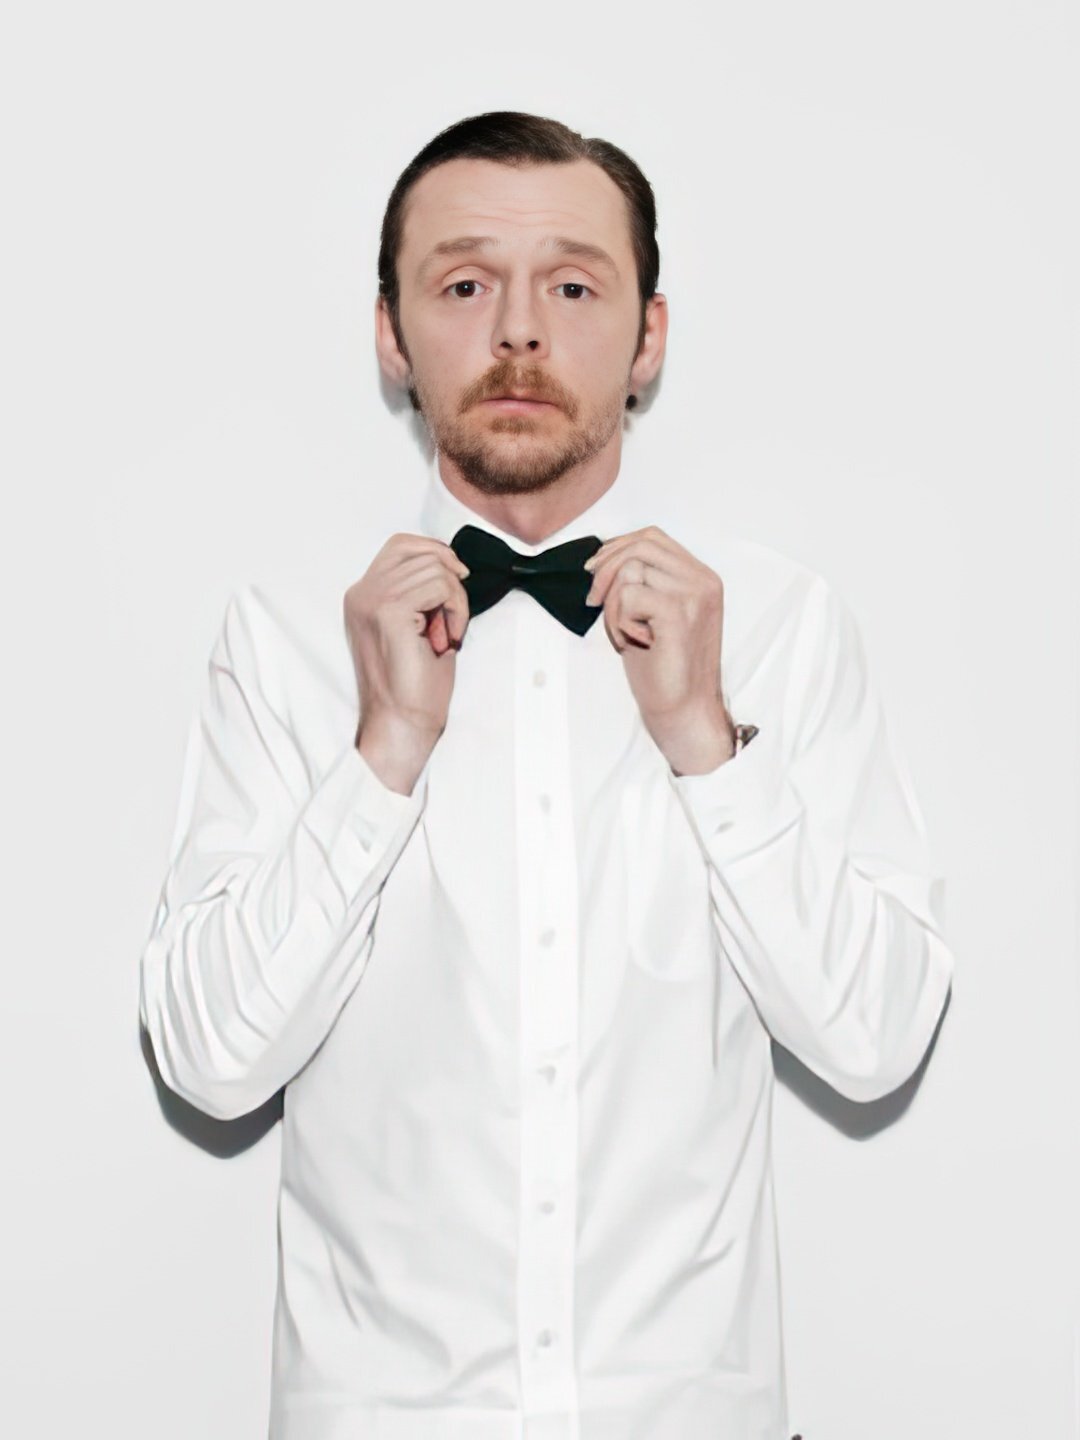 Simon Pegg who is his mother